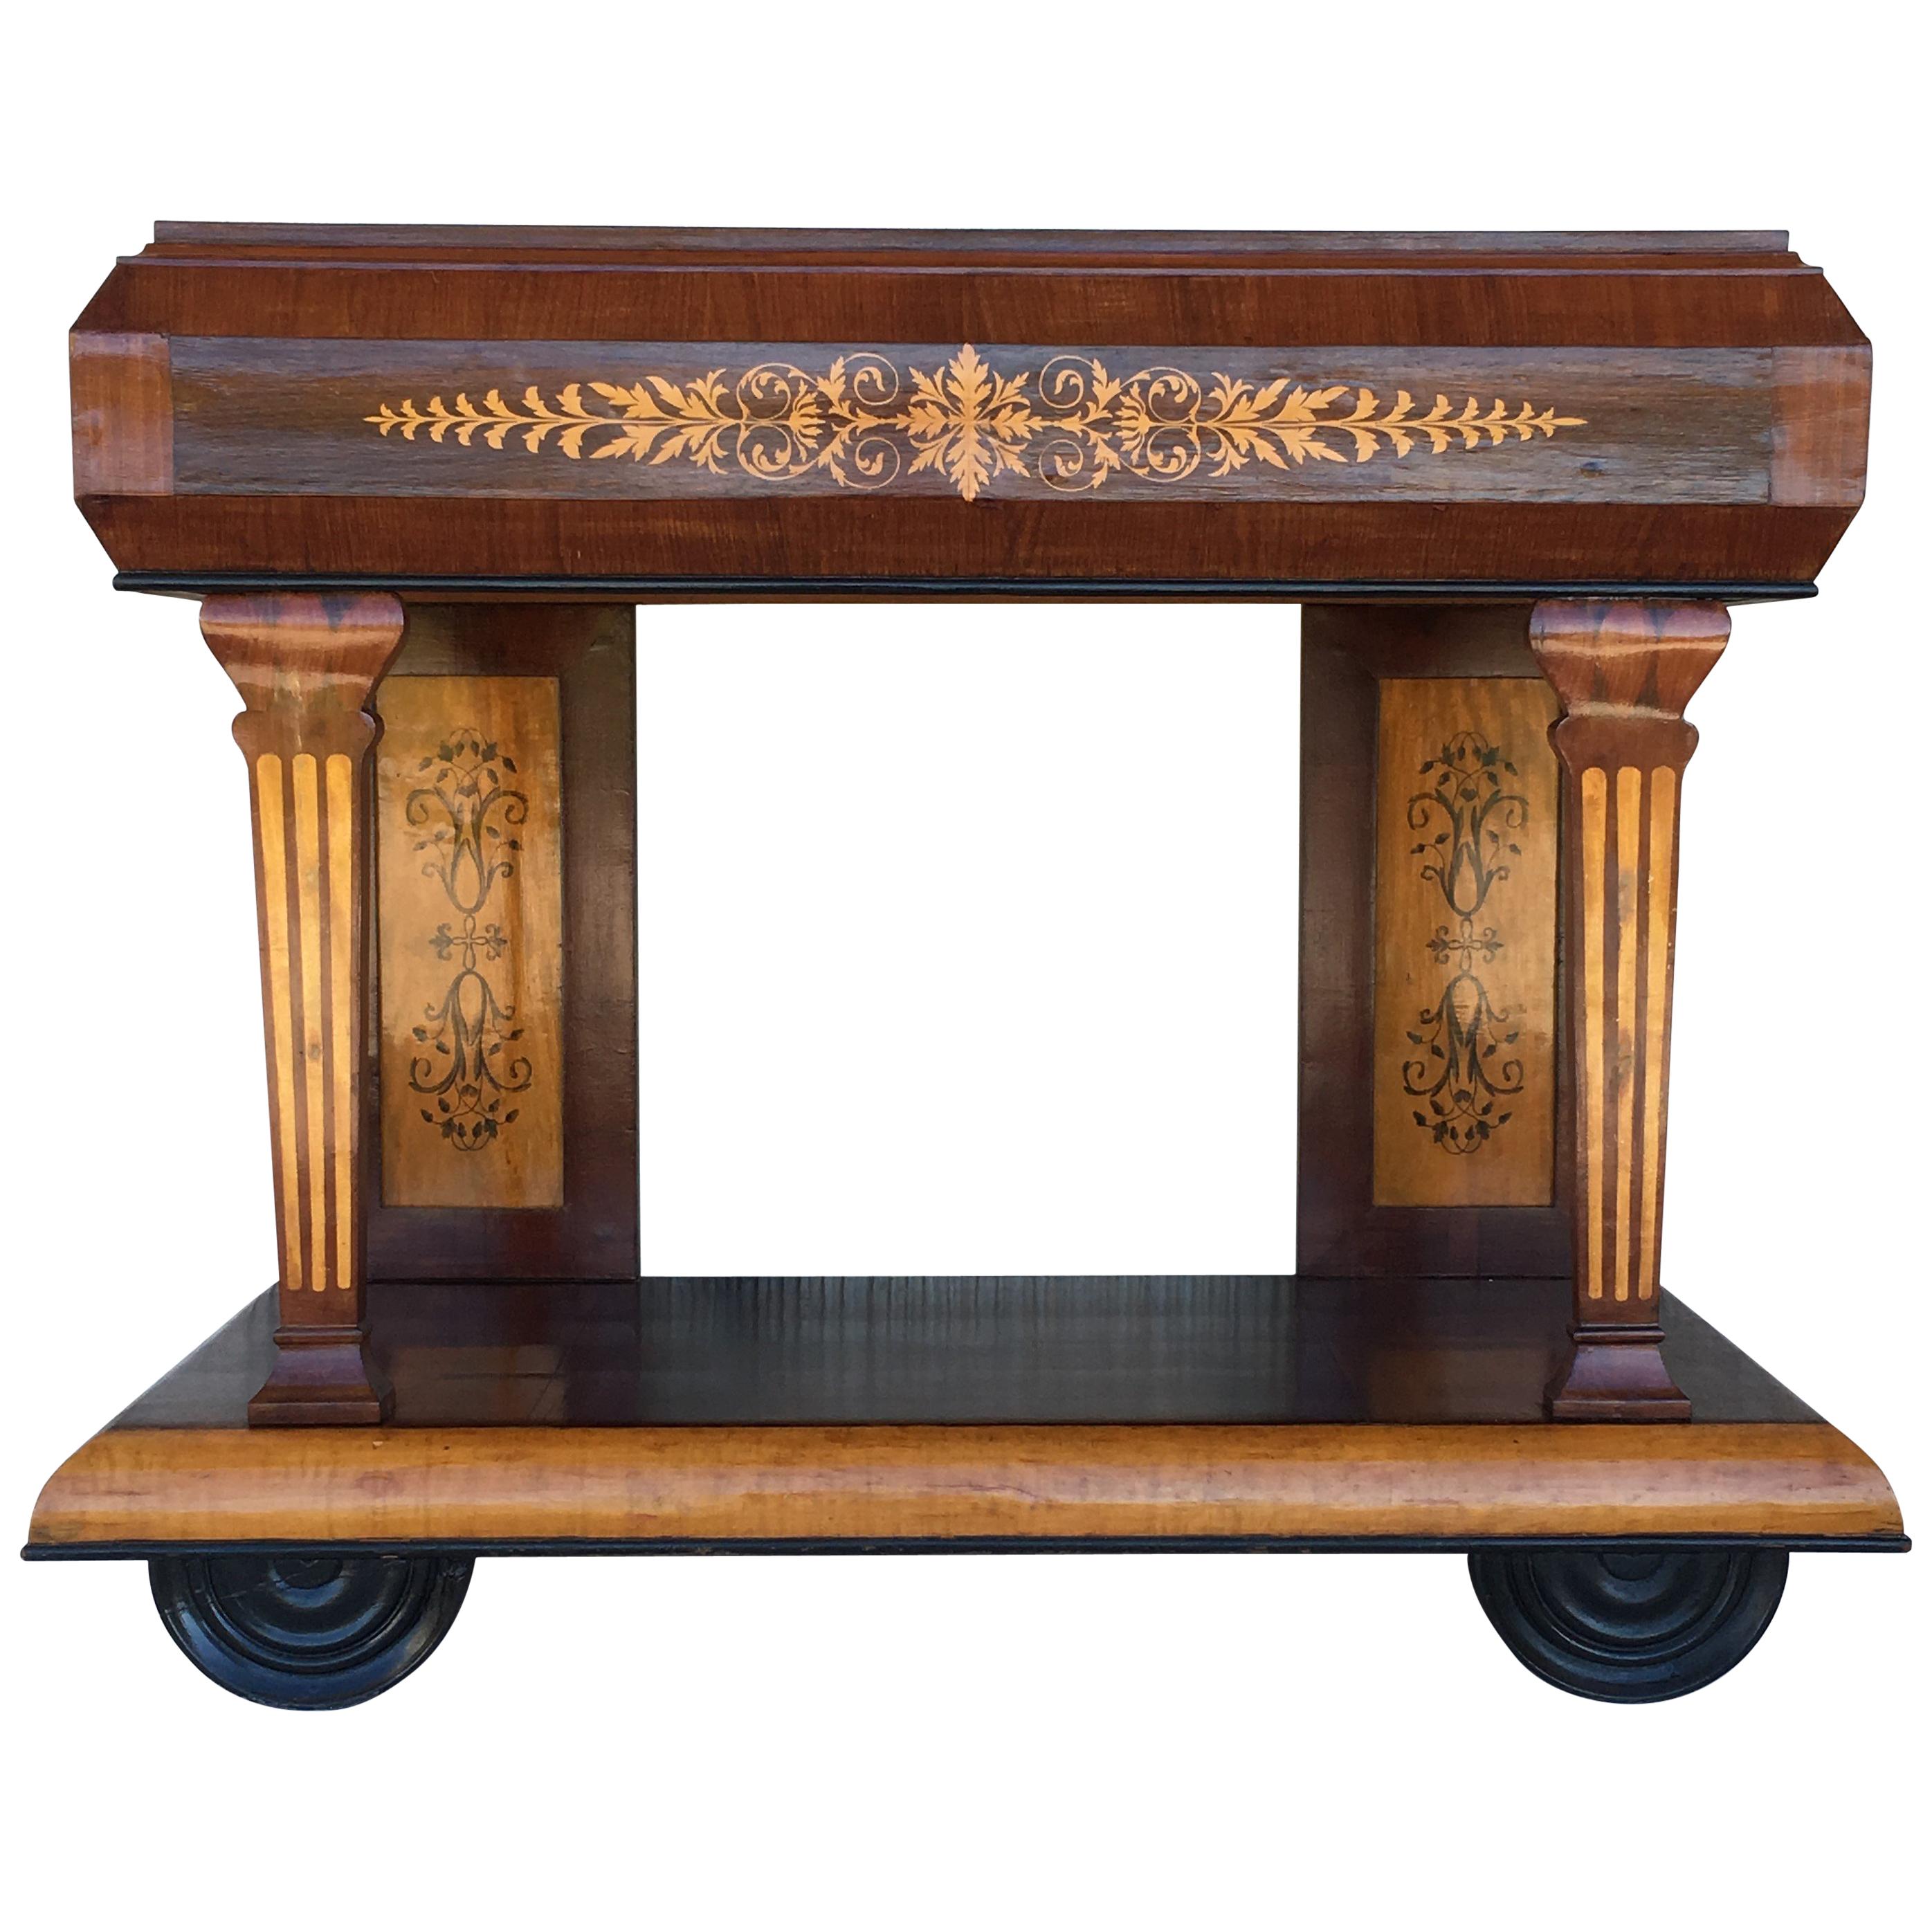 1830s French Empire Marquetry Console Table in Rosewood and Maple